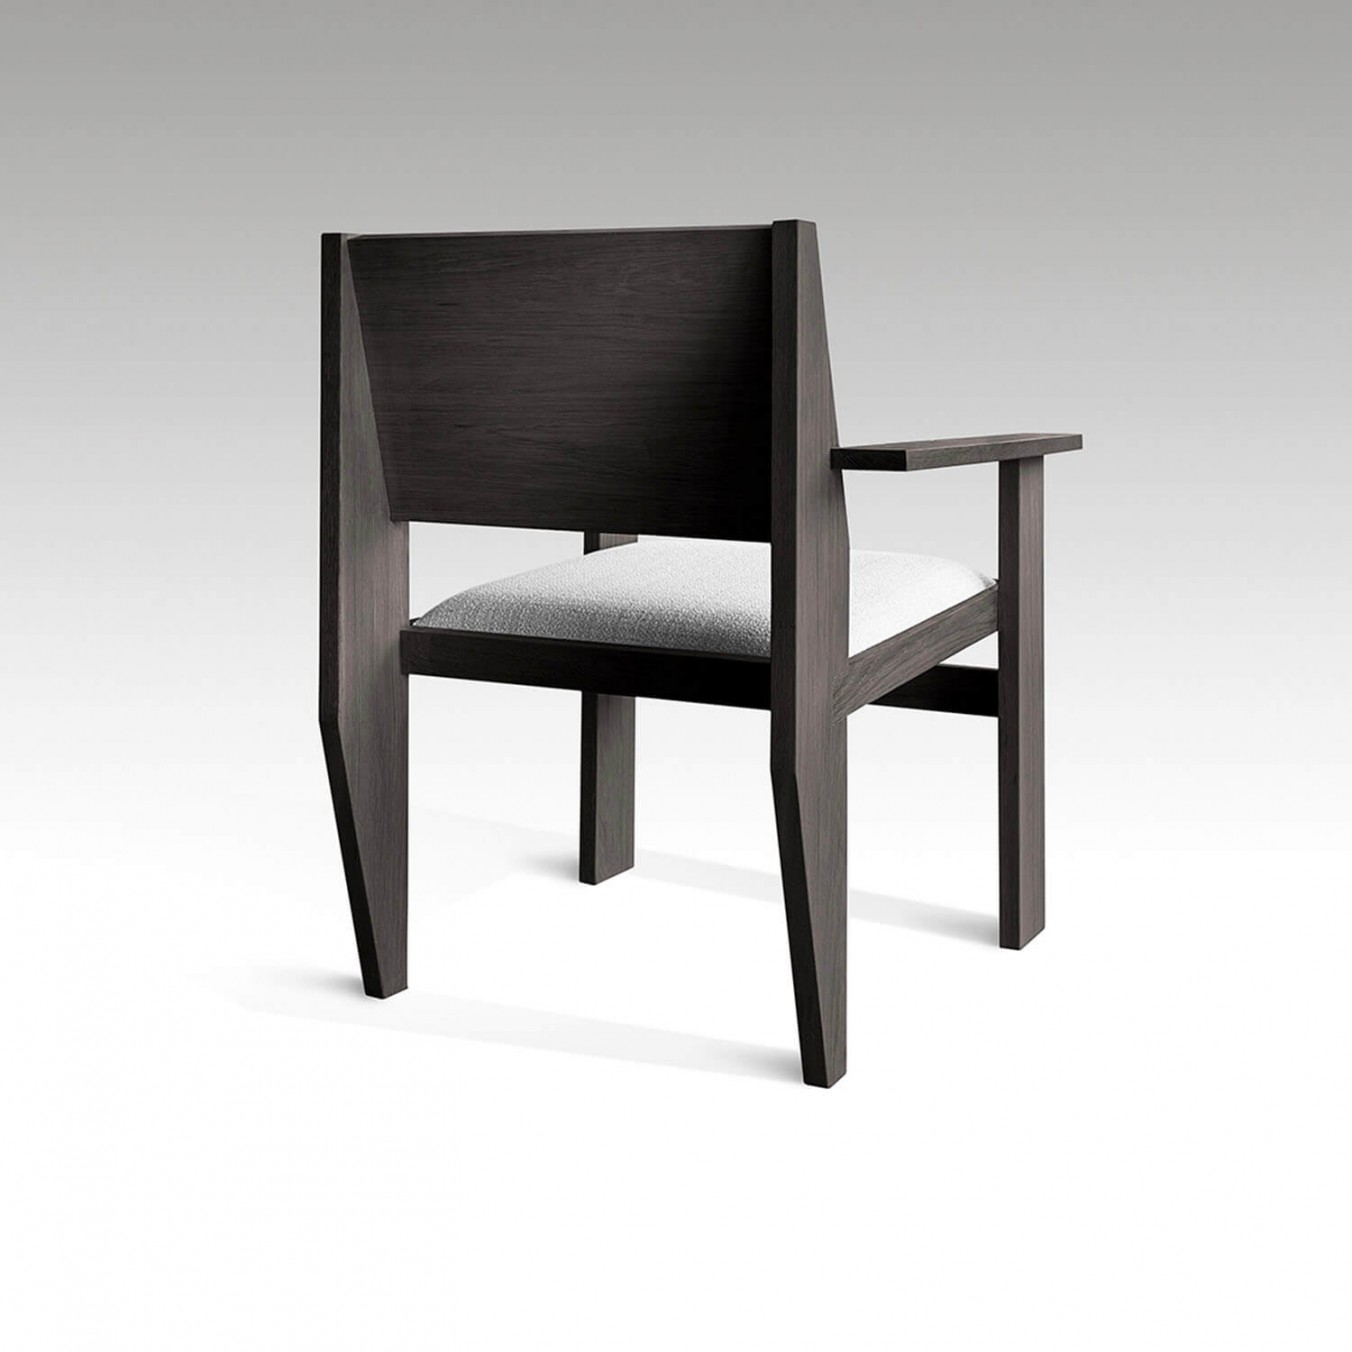 Moramour chair